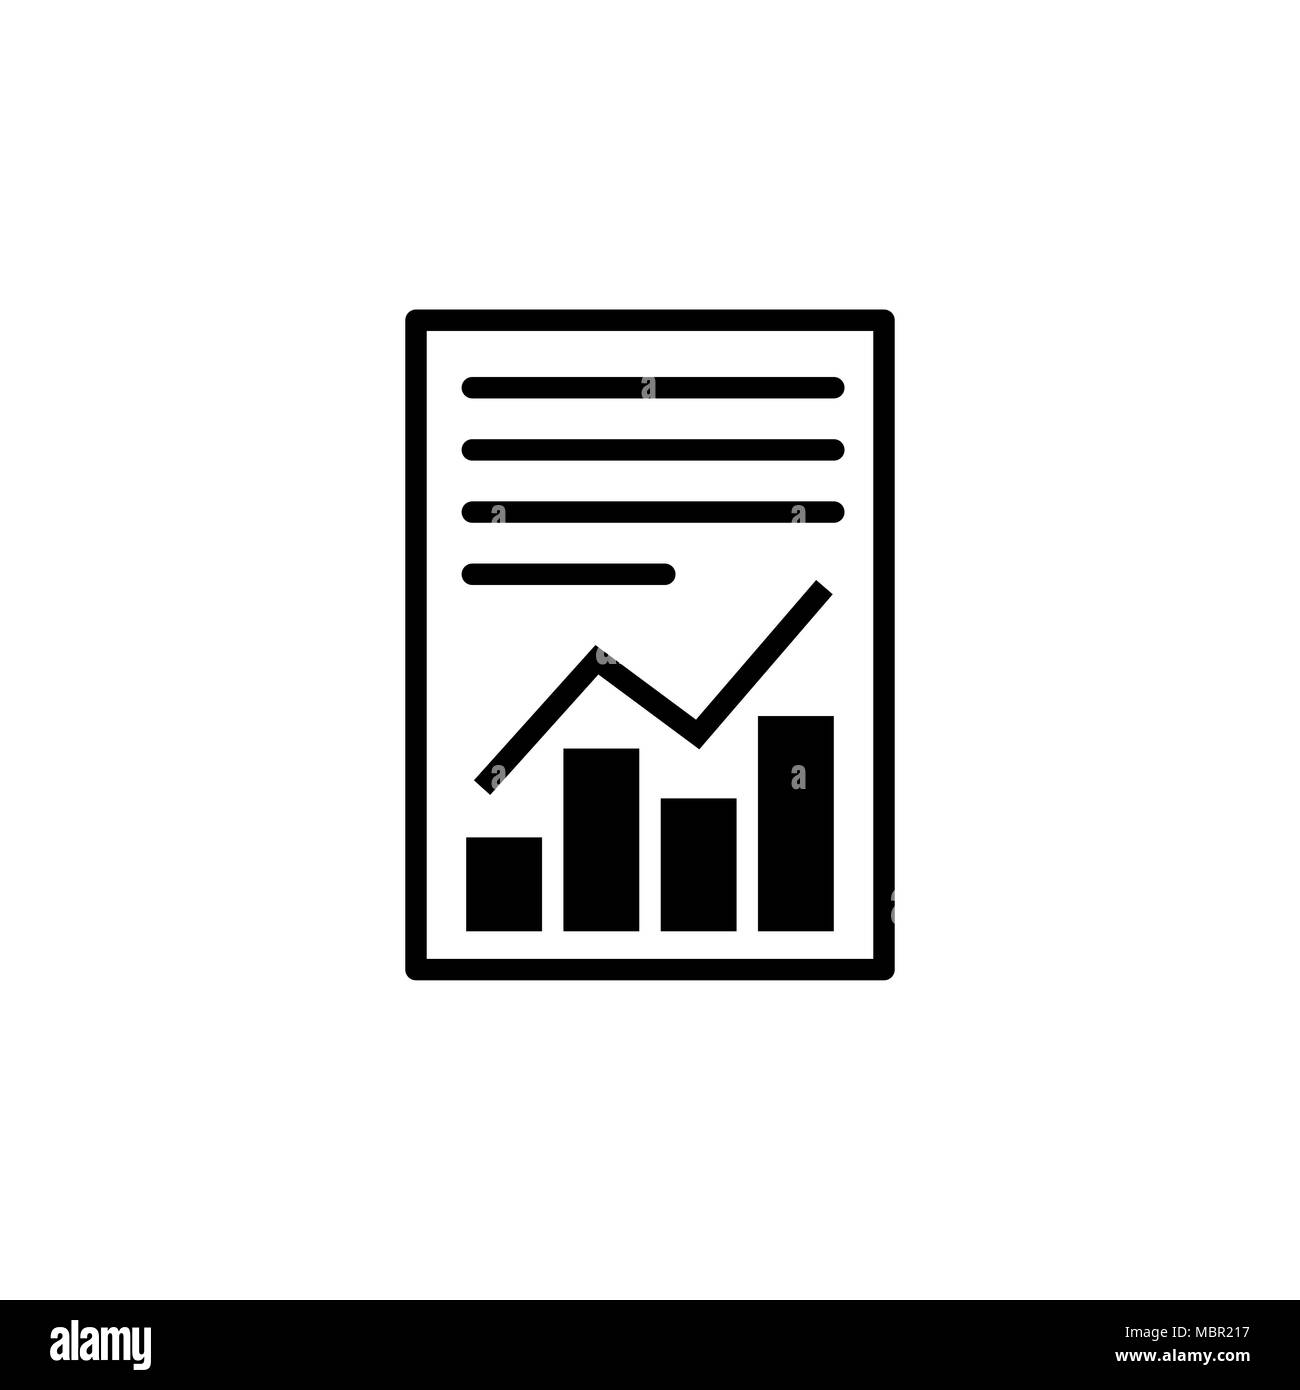 Report text file icon. Document with chart symbol Stock Vector